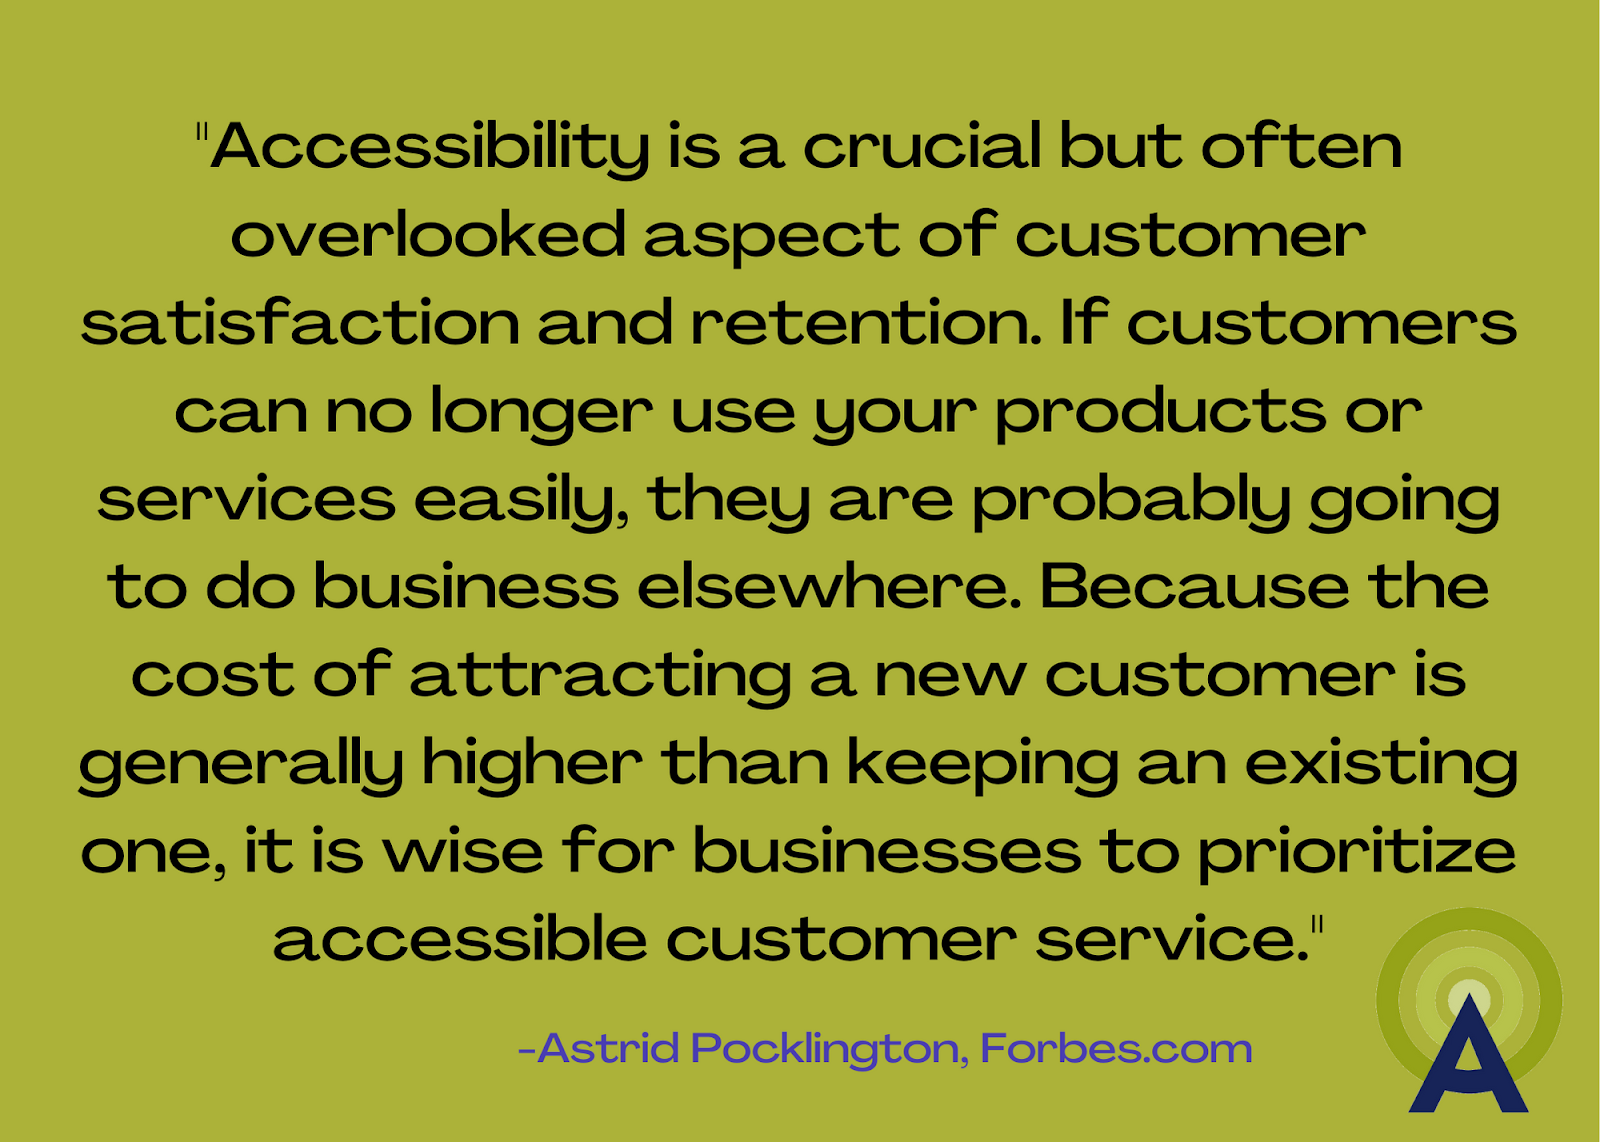 Astrid Pocklington Quote from Forbes